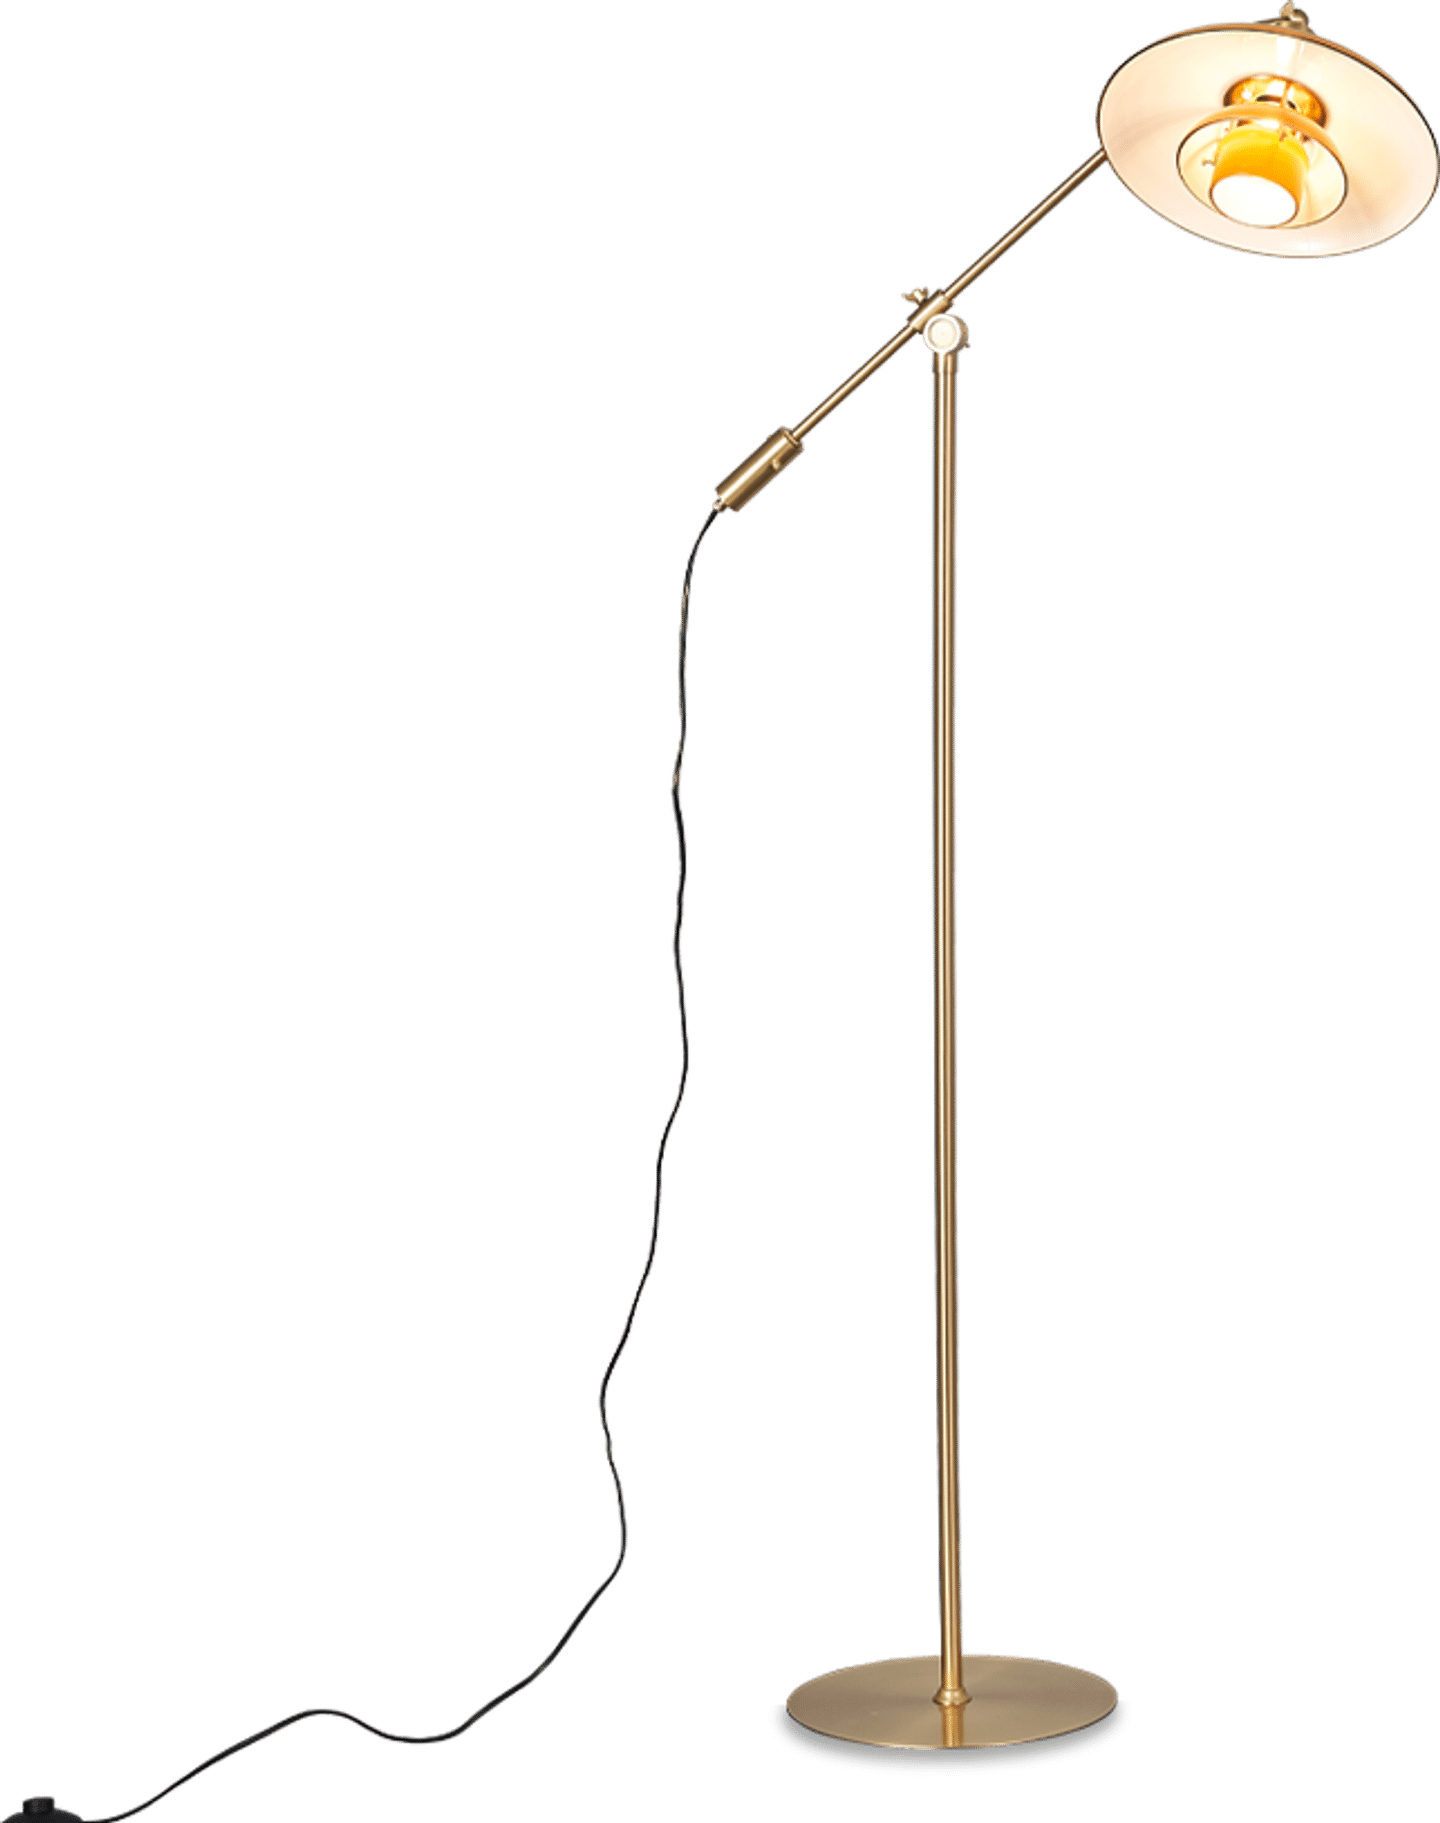 Cantilever Style Floor Lamp Amber image.